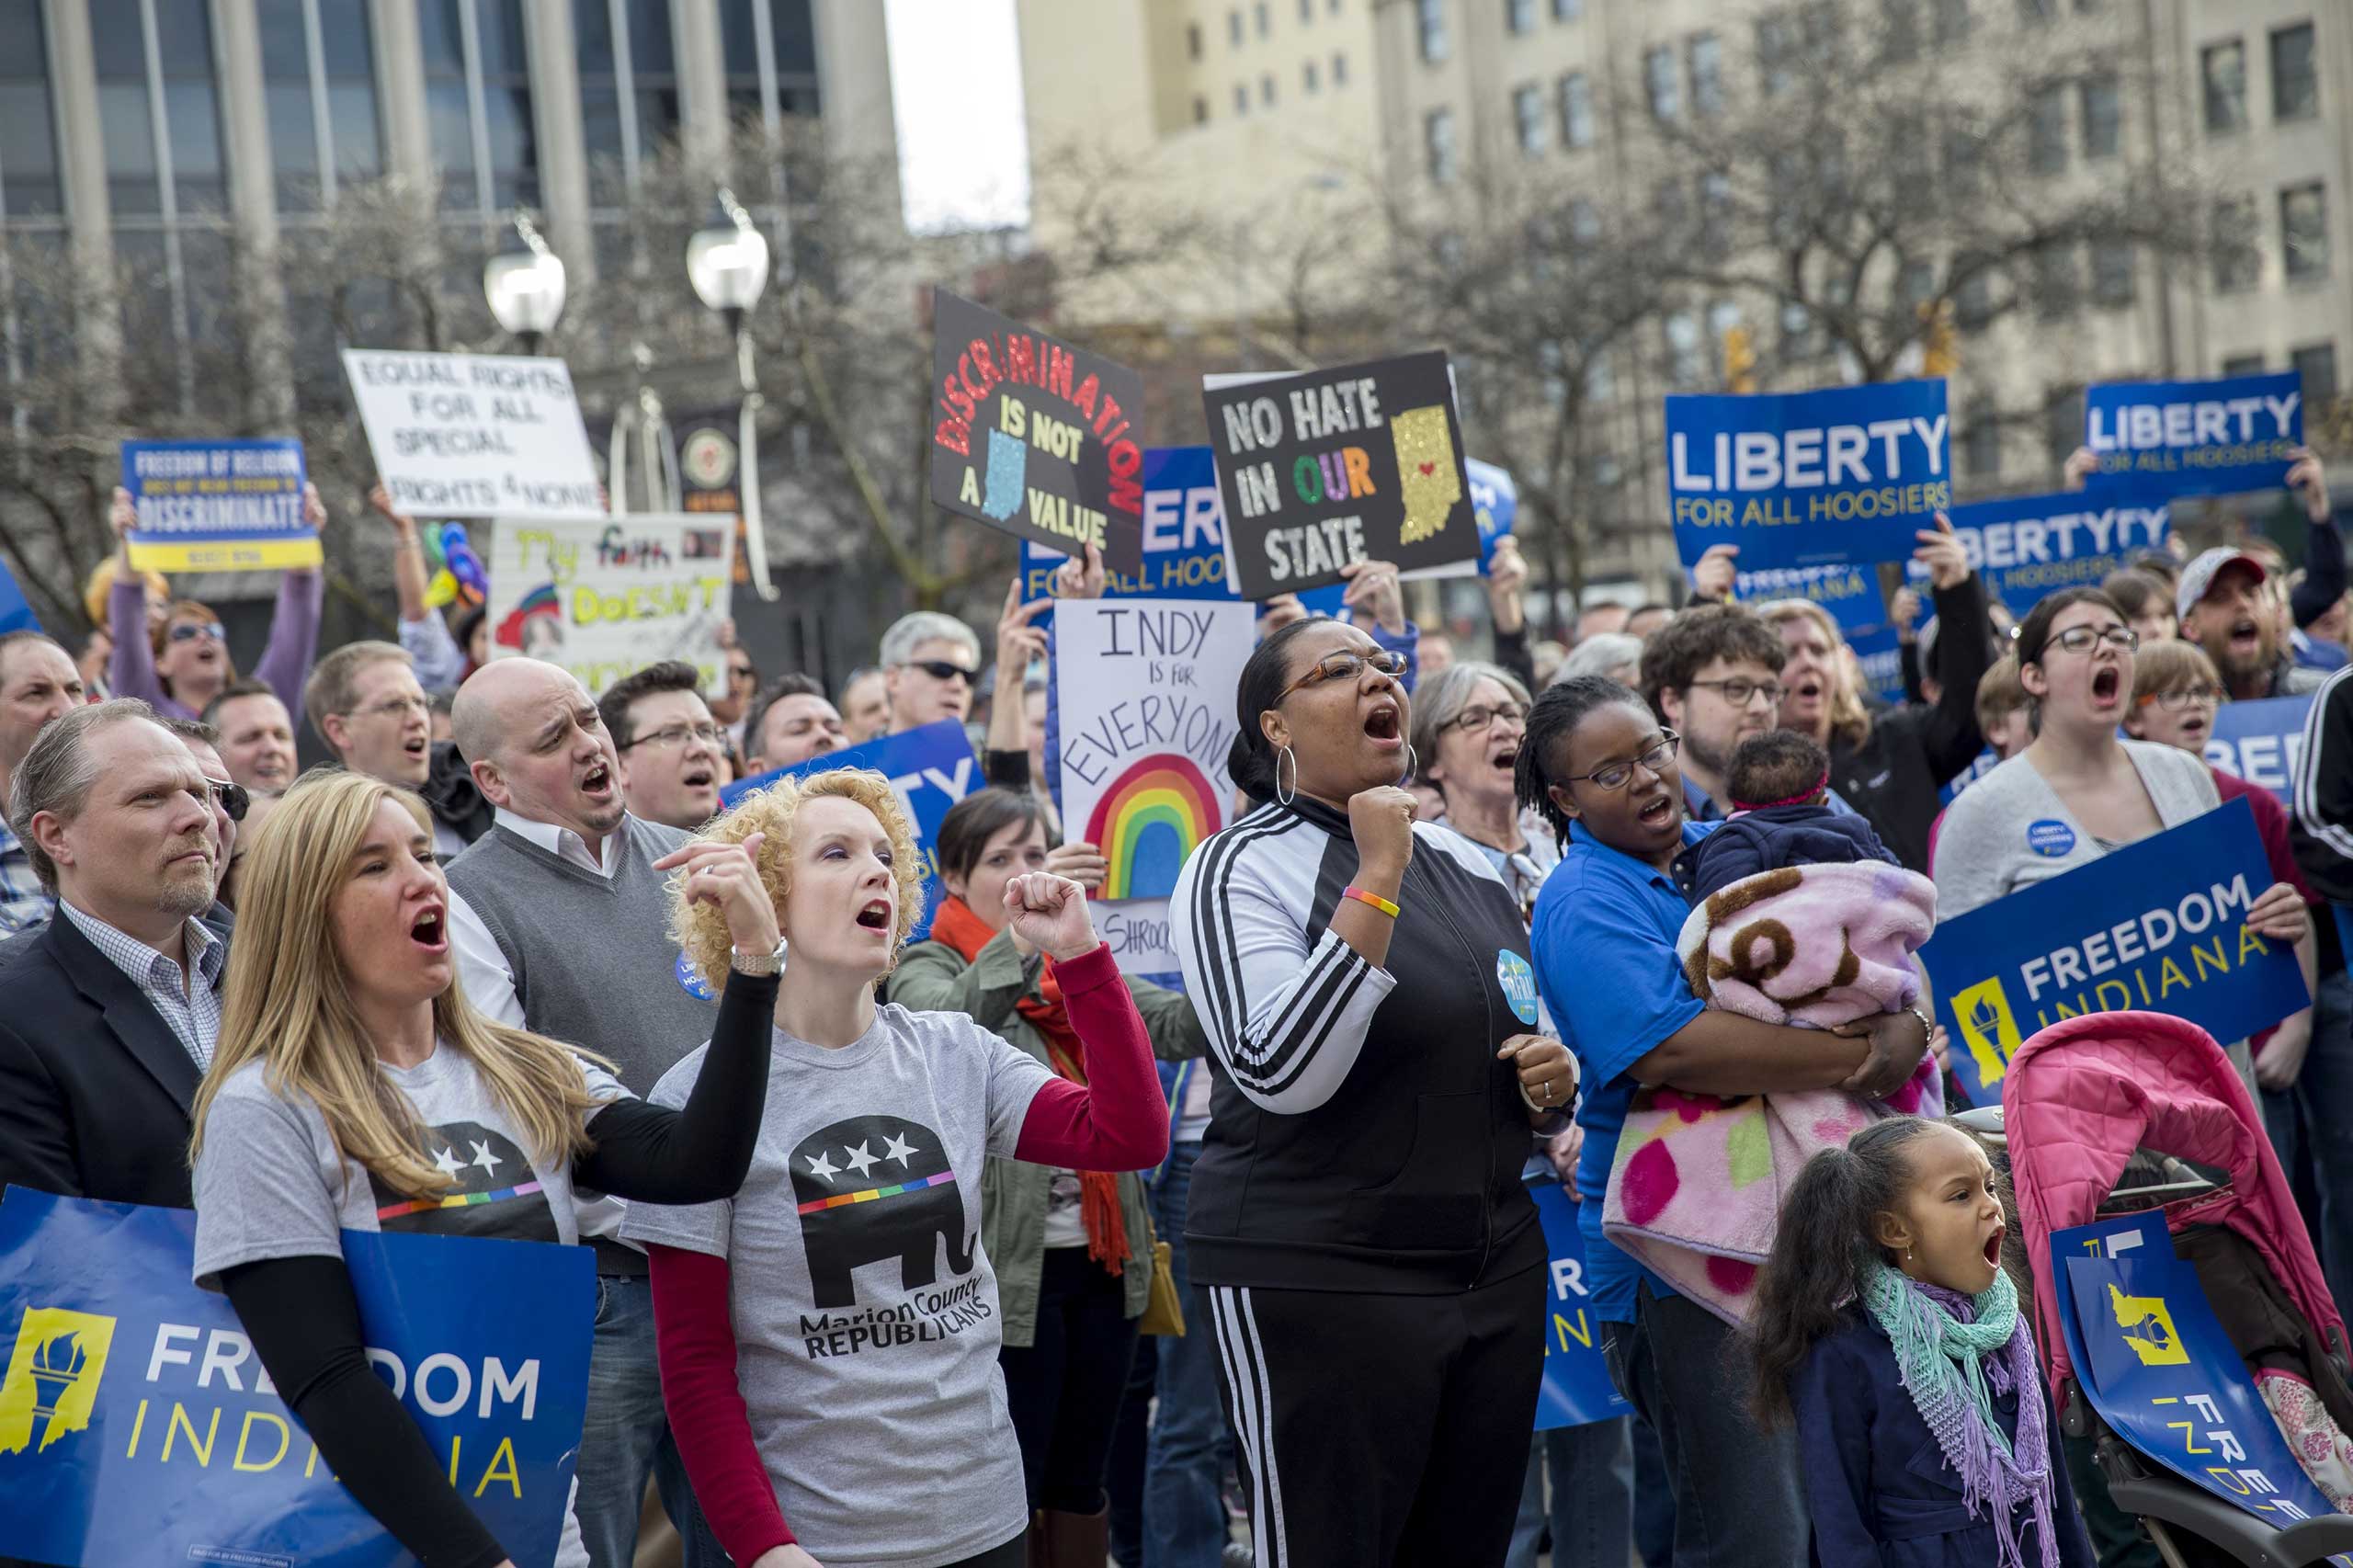 Demonstrators  gather outside the City County Building in Indianapolis, Indiana on March 30, 2015.